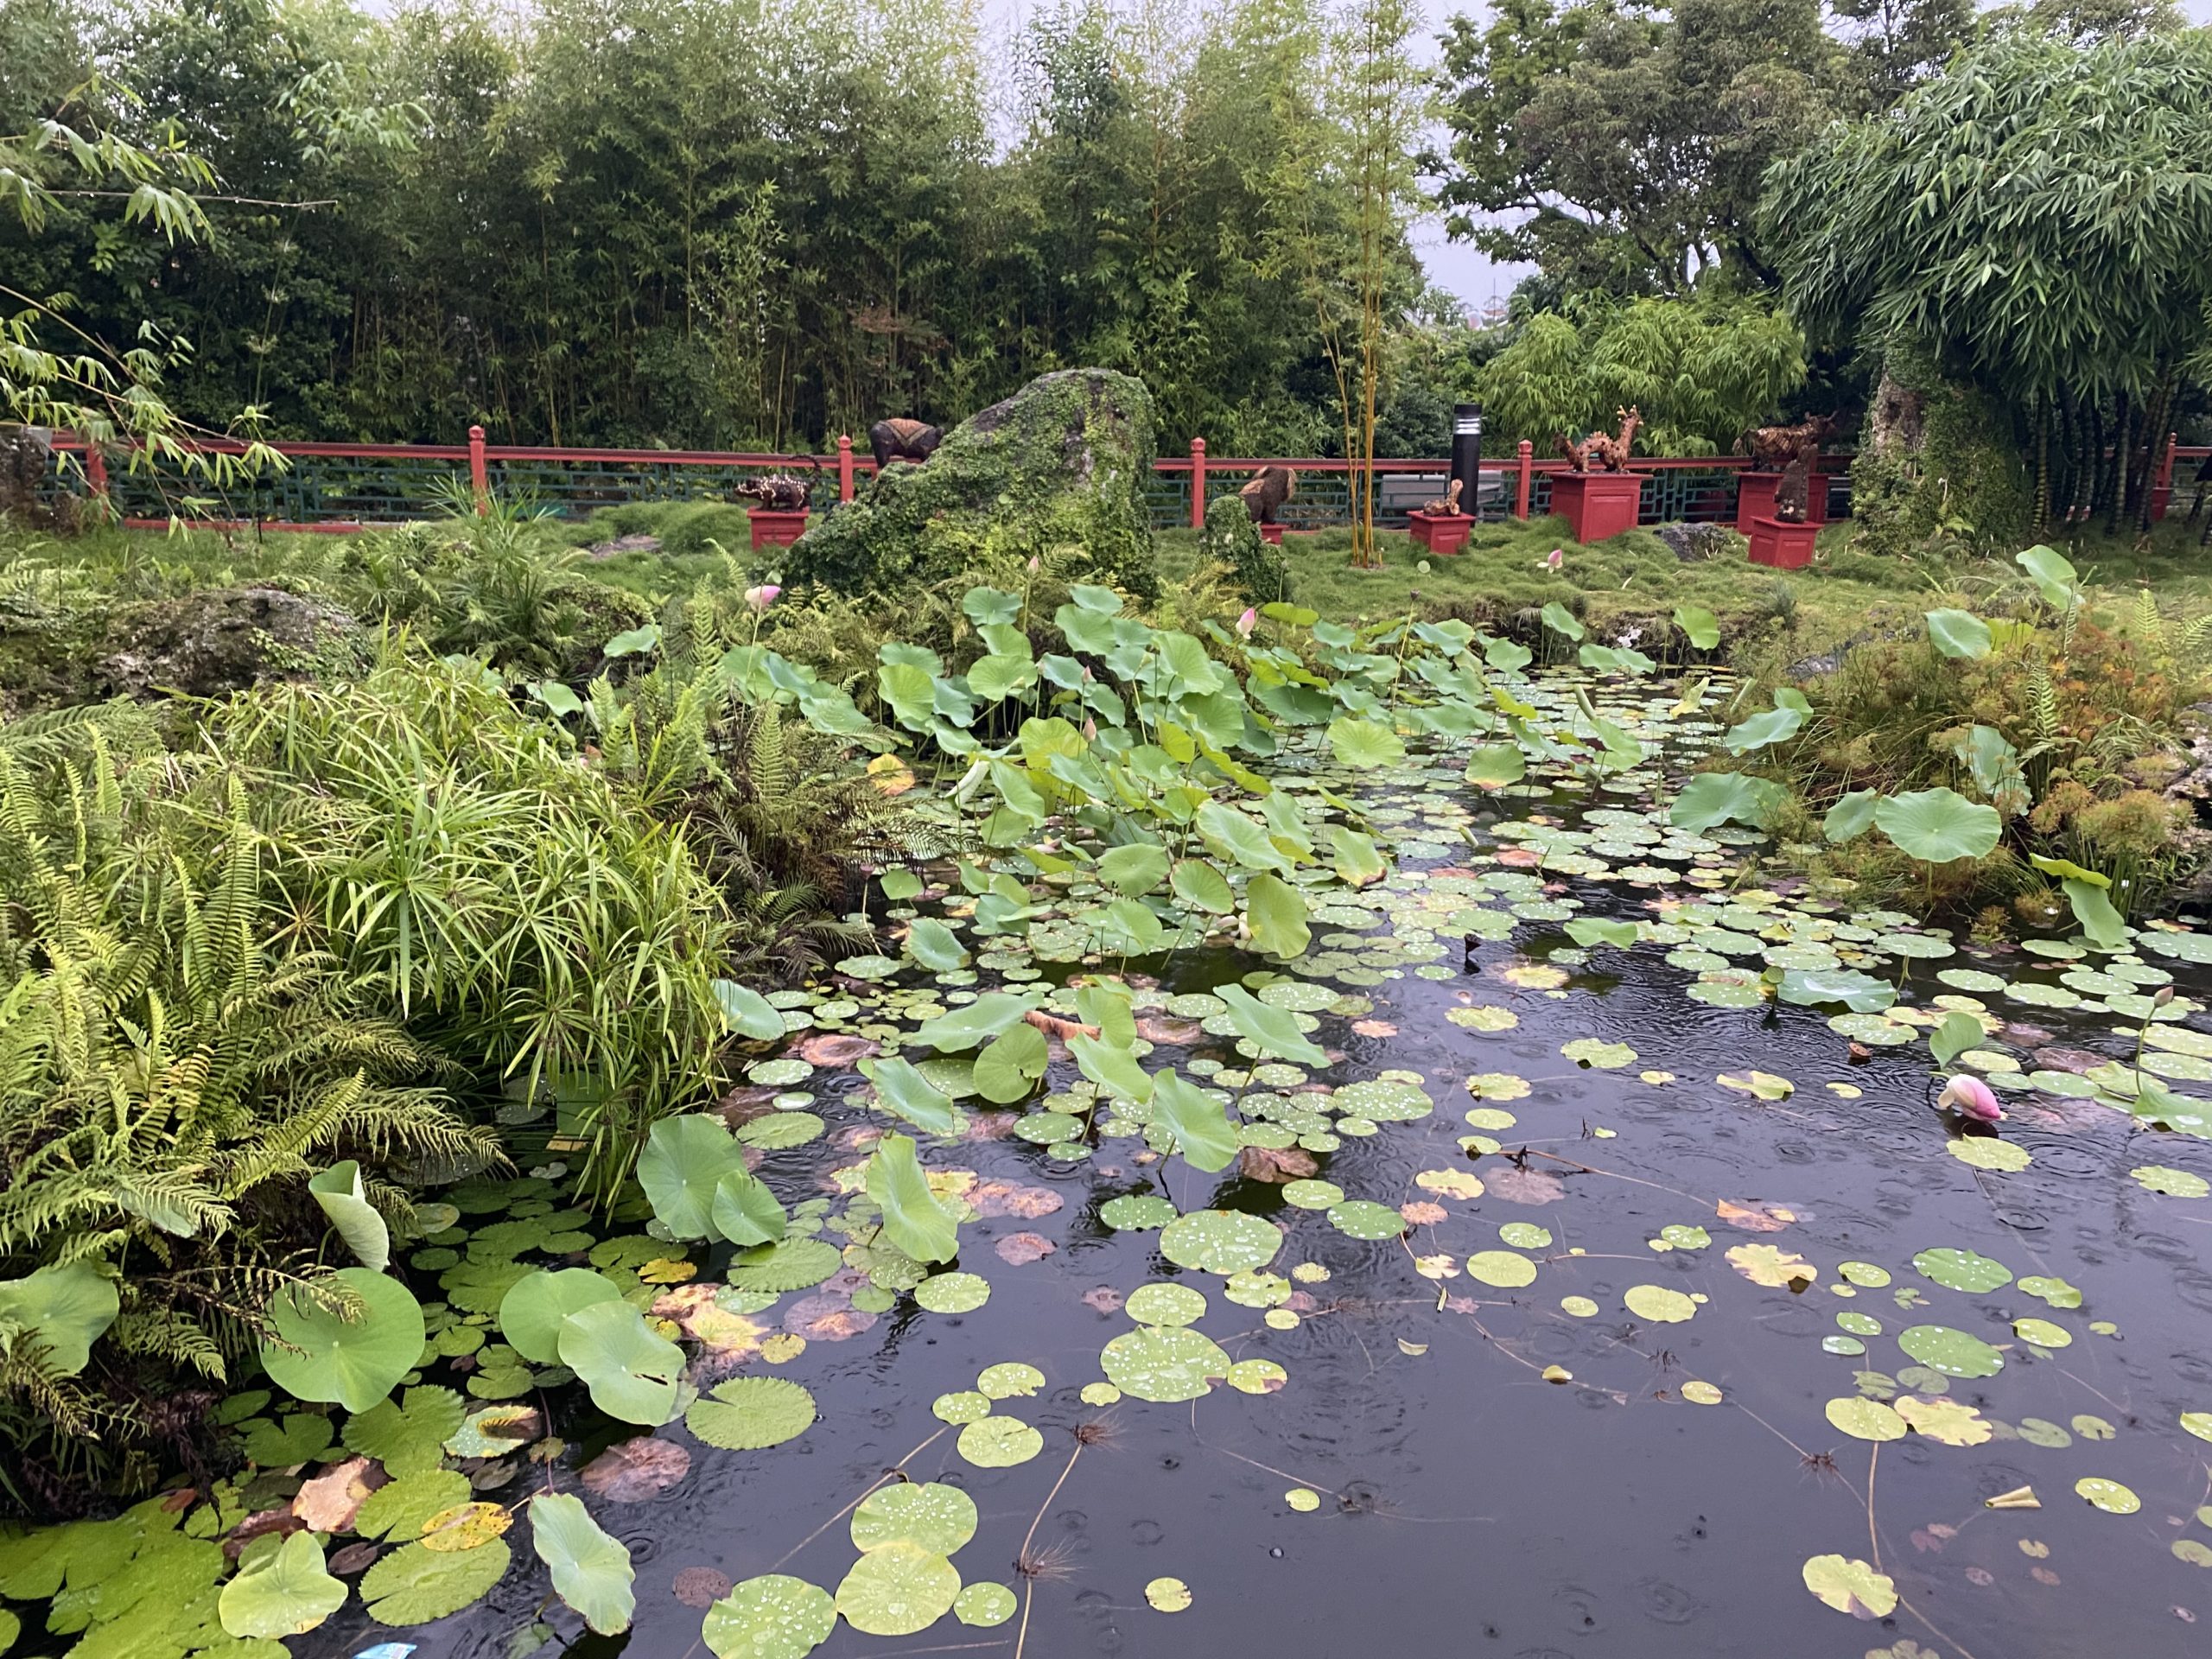 Pond with water lilies and healthy ecosystem